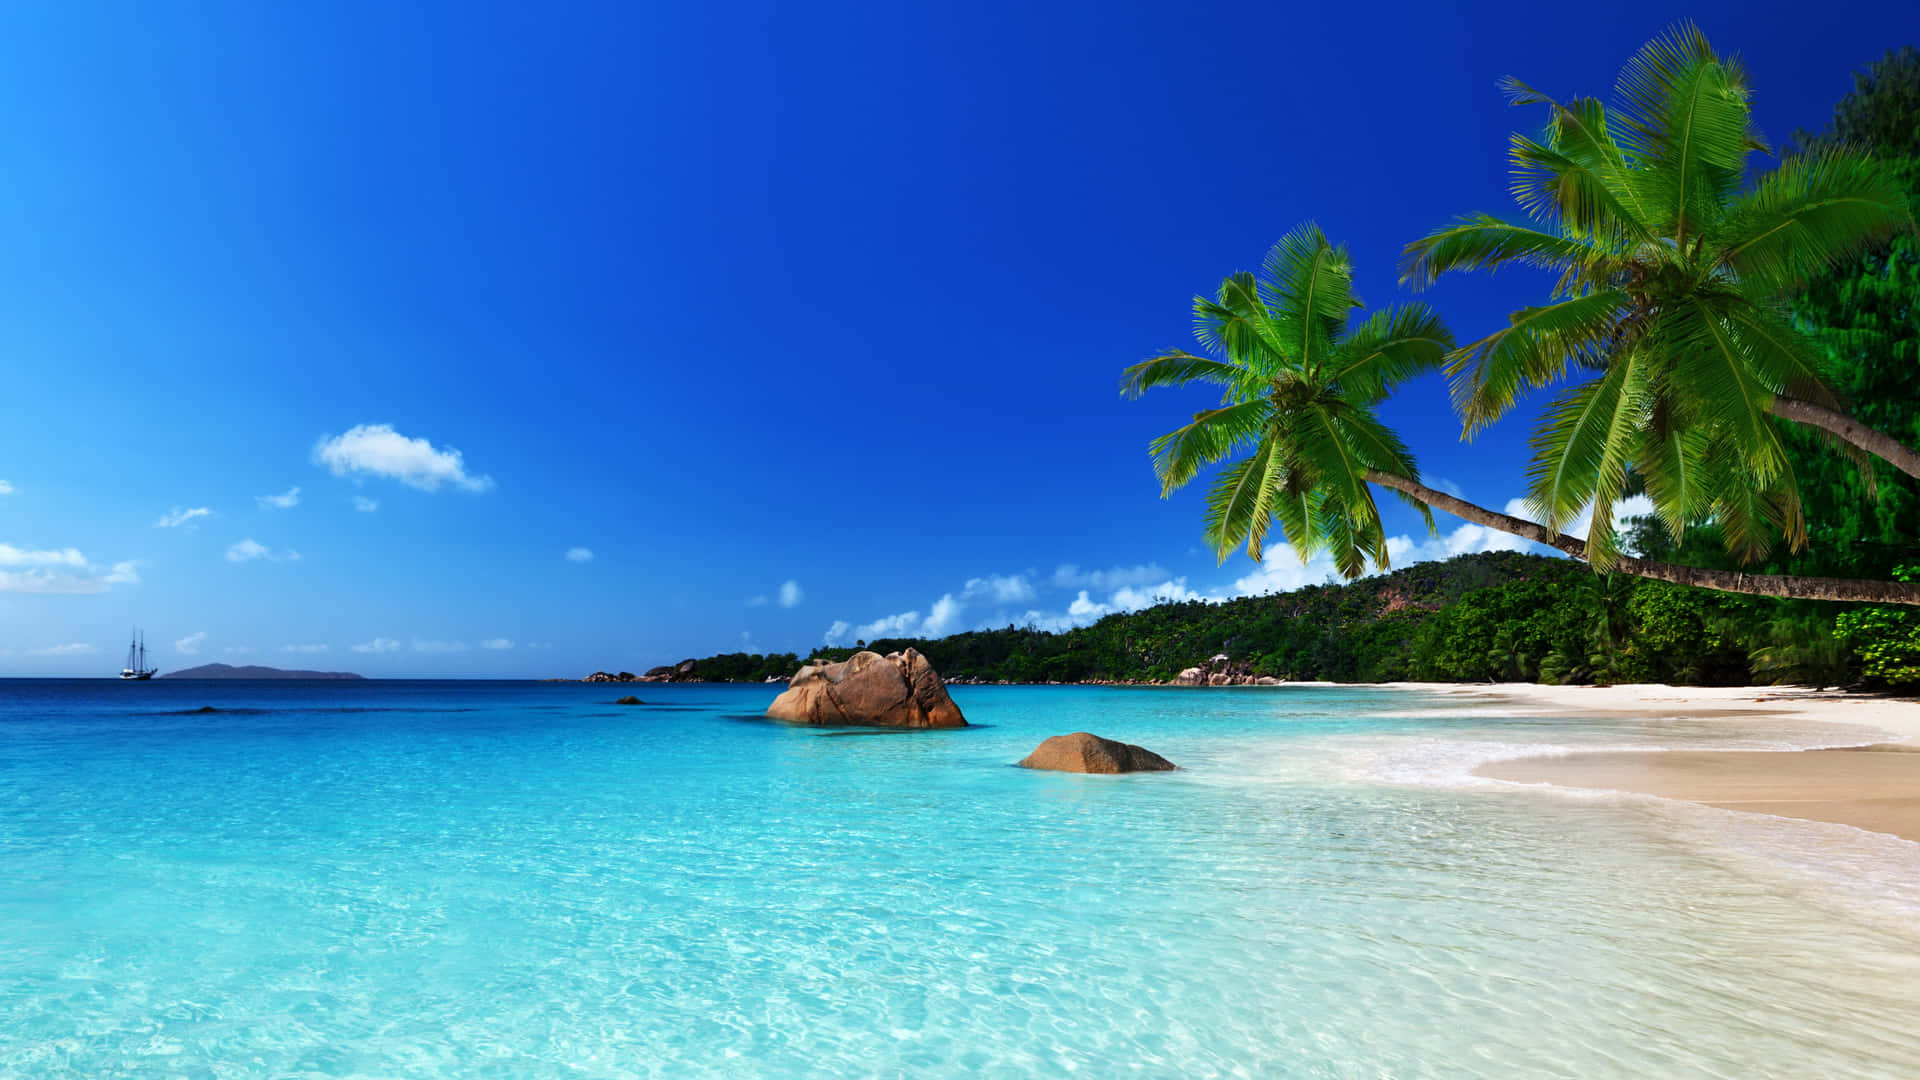 Stunning Turquoise Waters of a Golden Beach